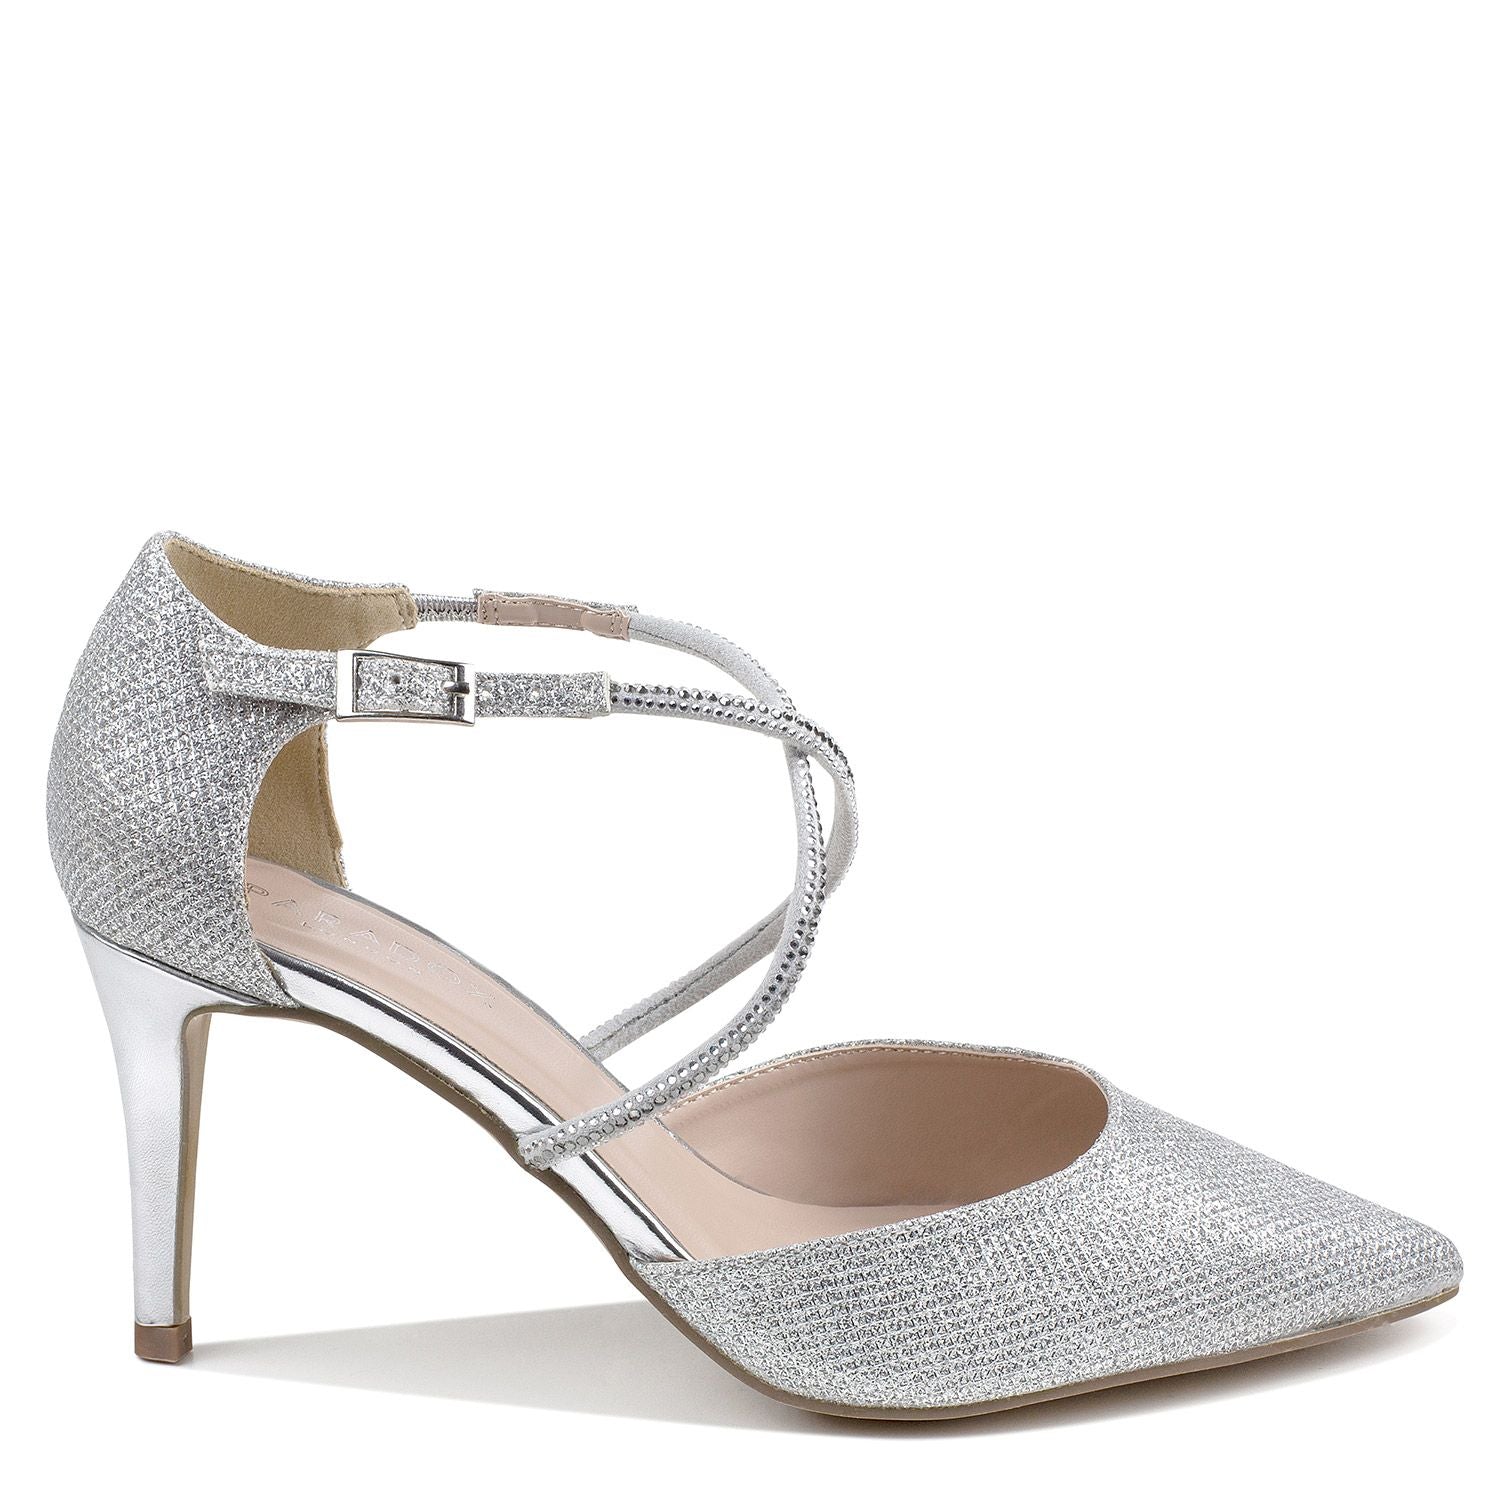 Side view of 3/4 inch high heel with silver metallic materia